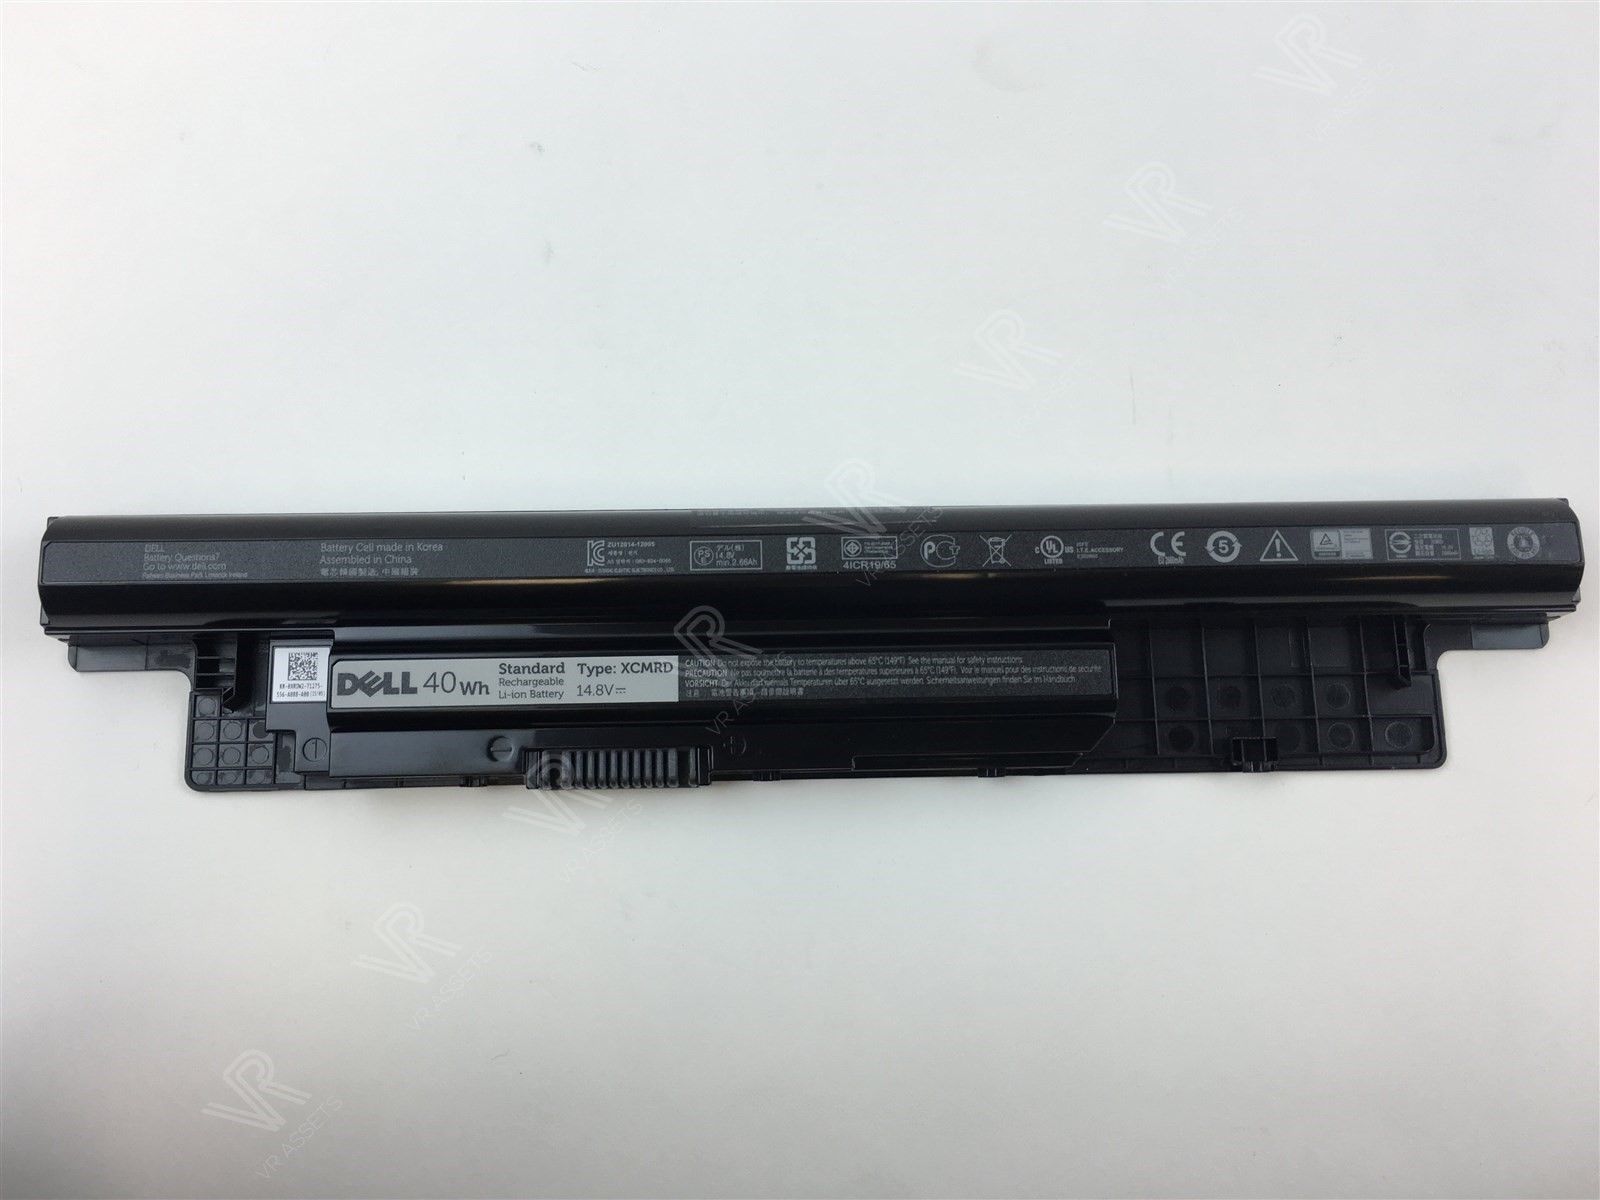 Dell Inspiron Vostro 14.8V 40Wh 4 Cell Laptop Battery 0XRDW2 XCMRD